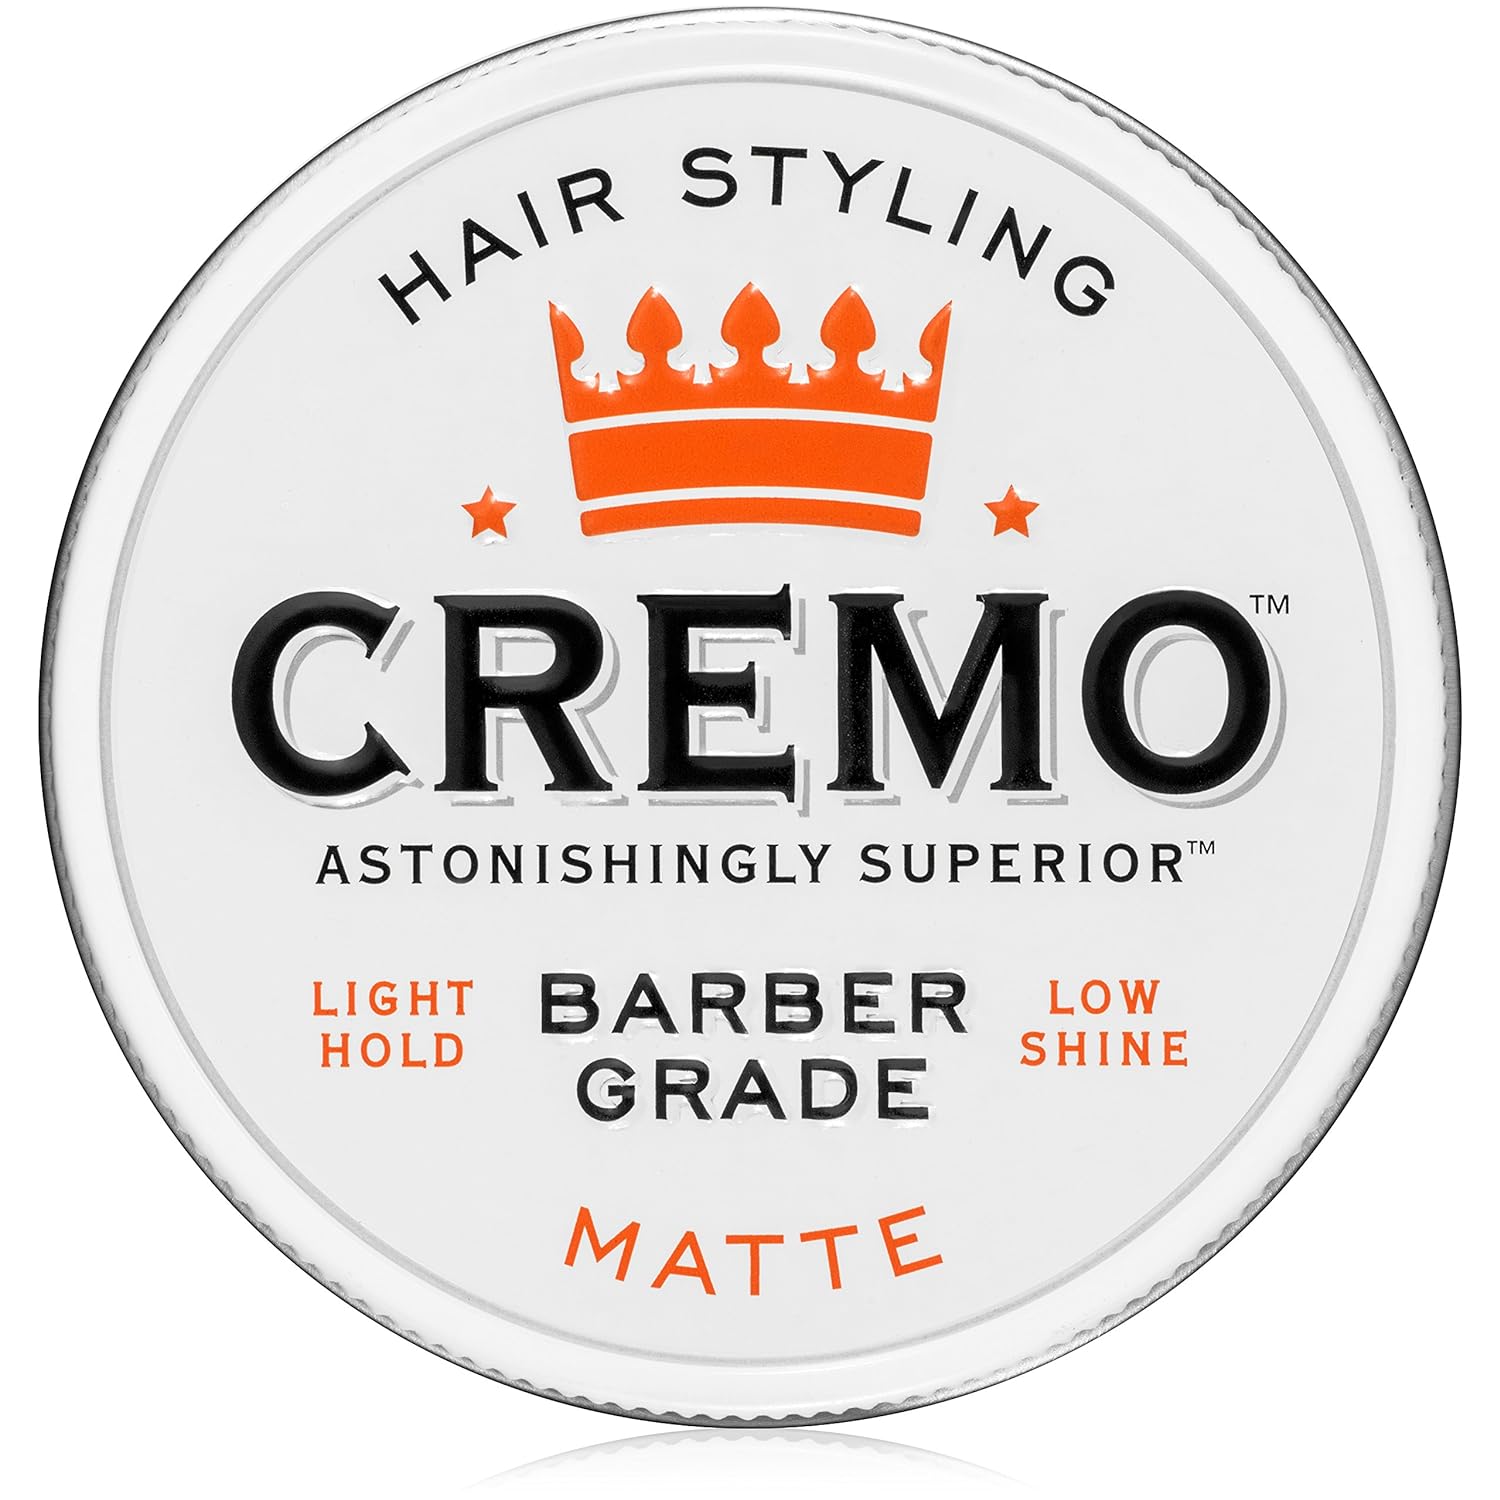 Cremo Premium Barber Grade Hair Styling Matte Cream, Light Hold, Low Shine, 4 Oz : Beauty & Personal Care